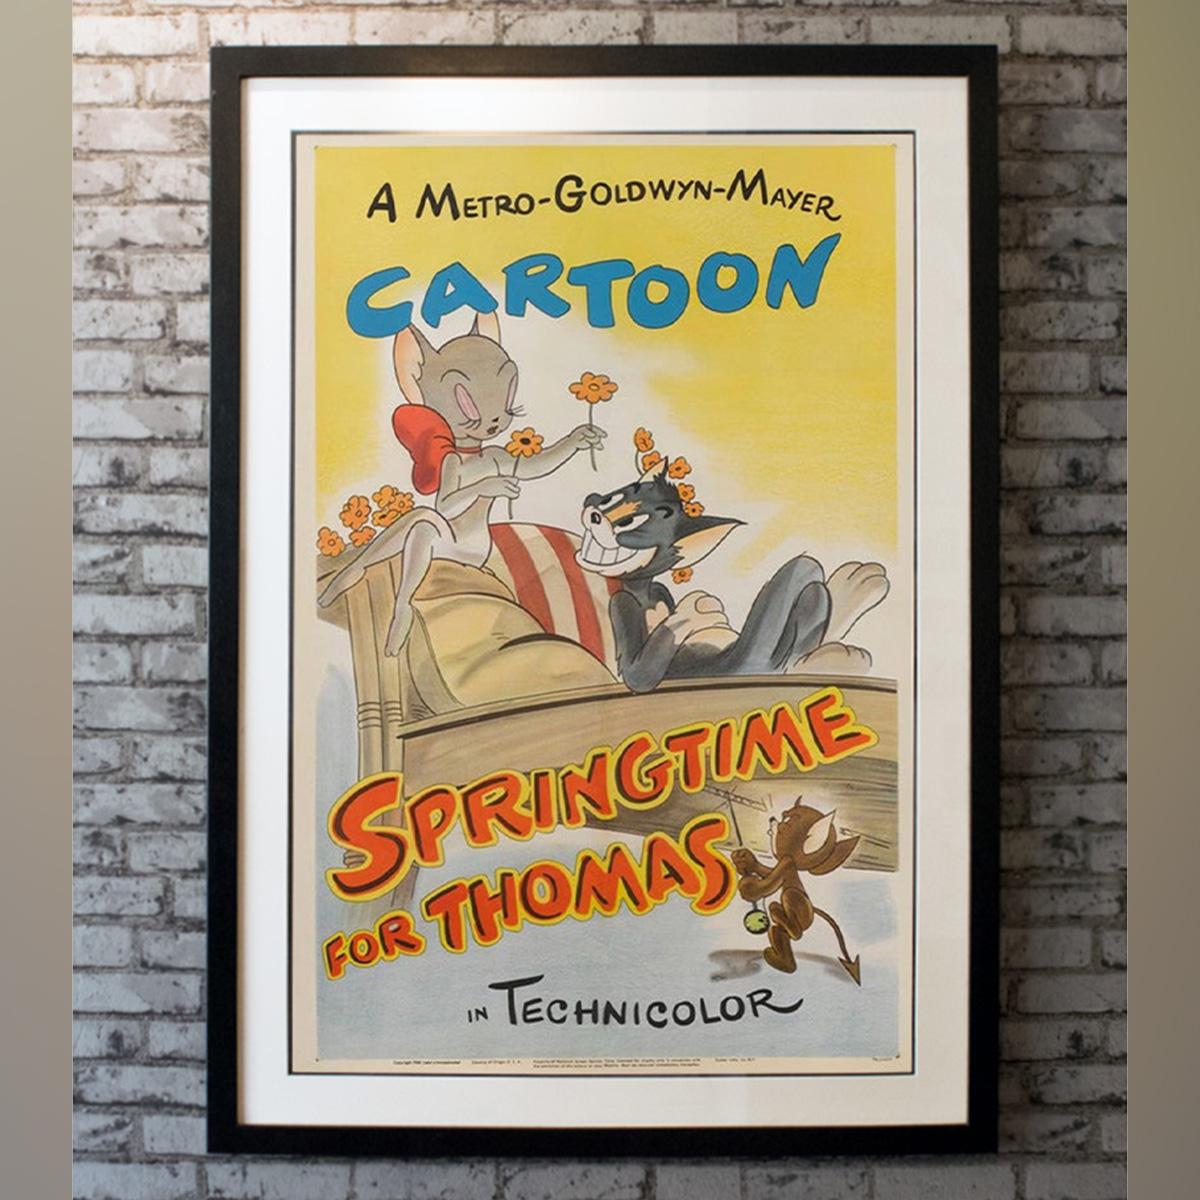 Springtime for Thomas is a 1946 American one-reel animated cartoon and is the 23rd Tom and Jerry short directed by William Hanna and Joseph Barbera and produced by Fred Quimby.

Linen backing: £250